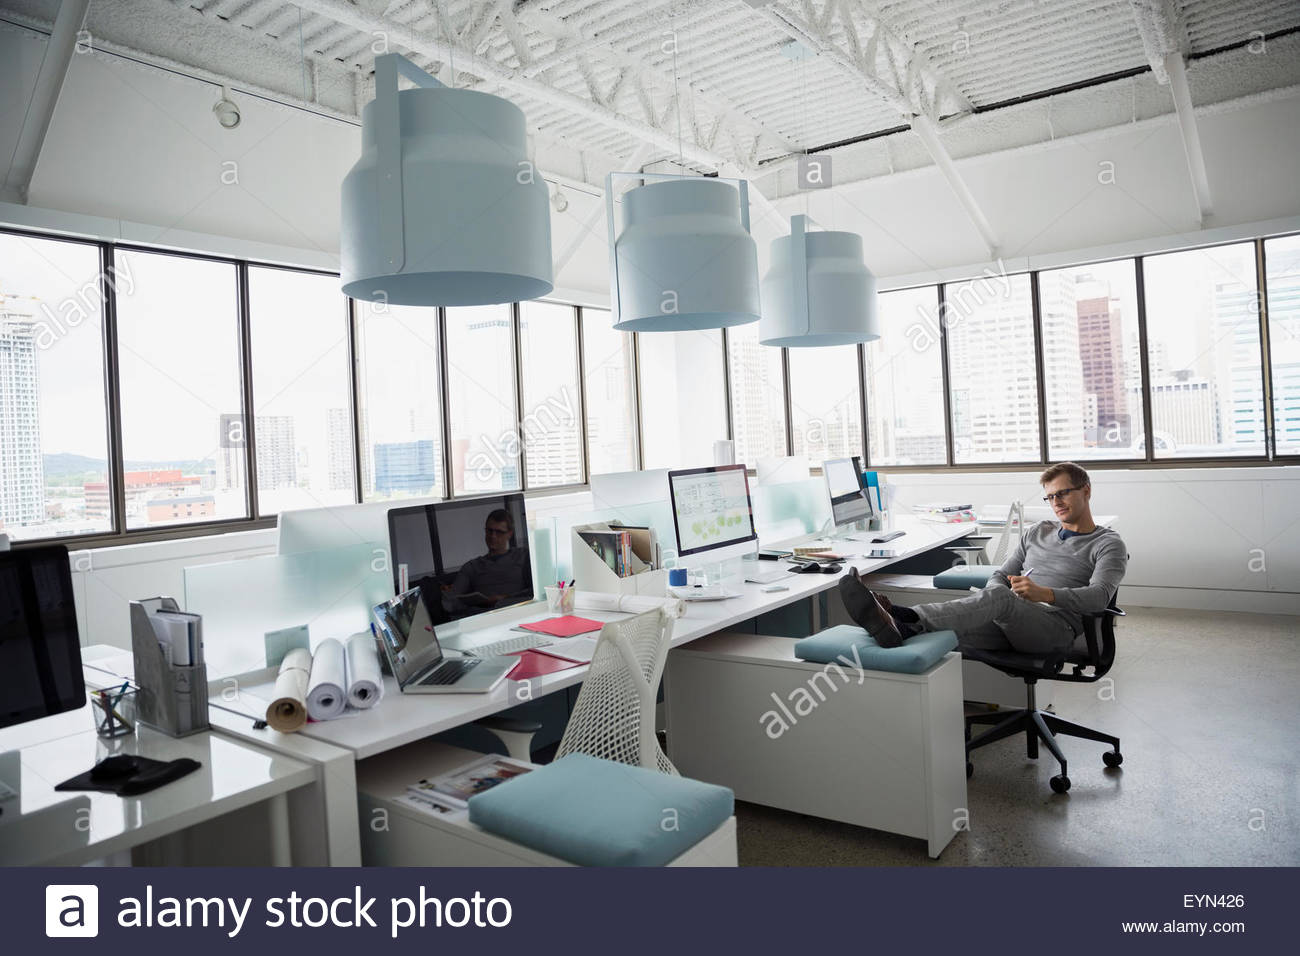 Architect with feet up in office Stock Photo